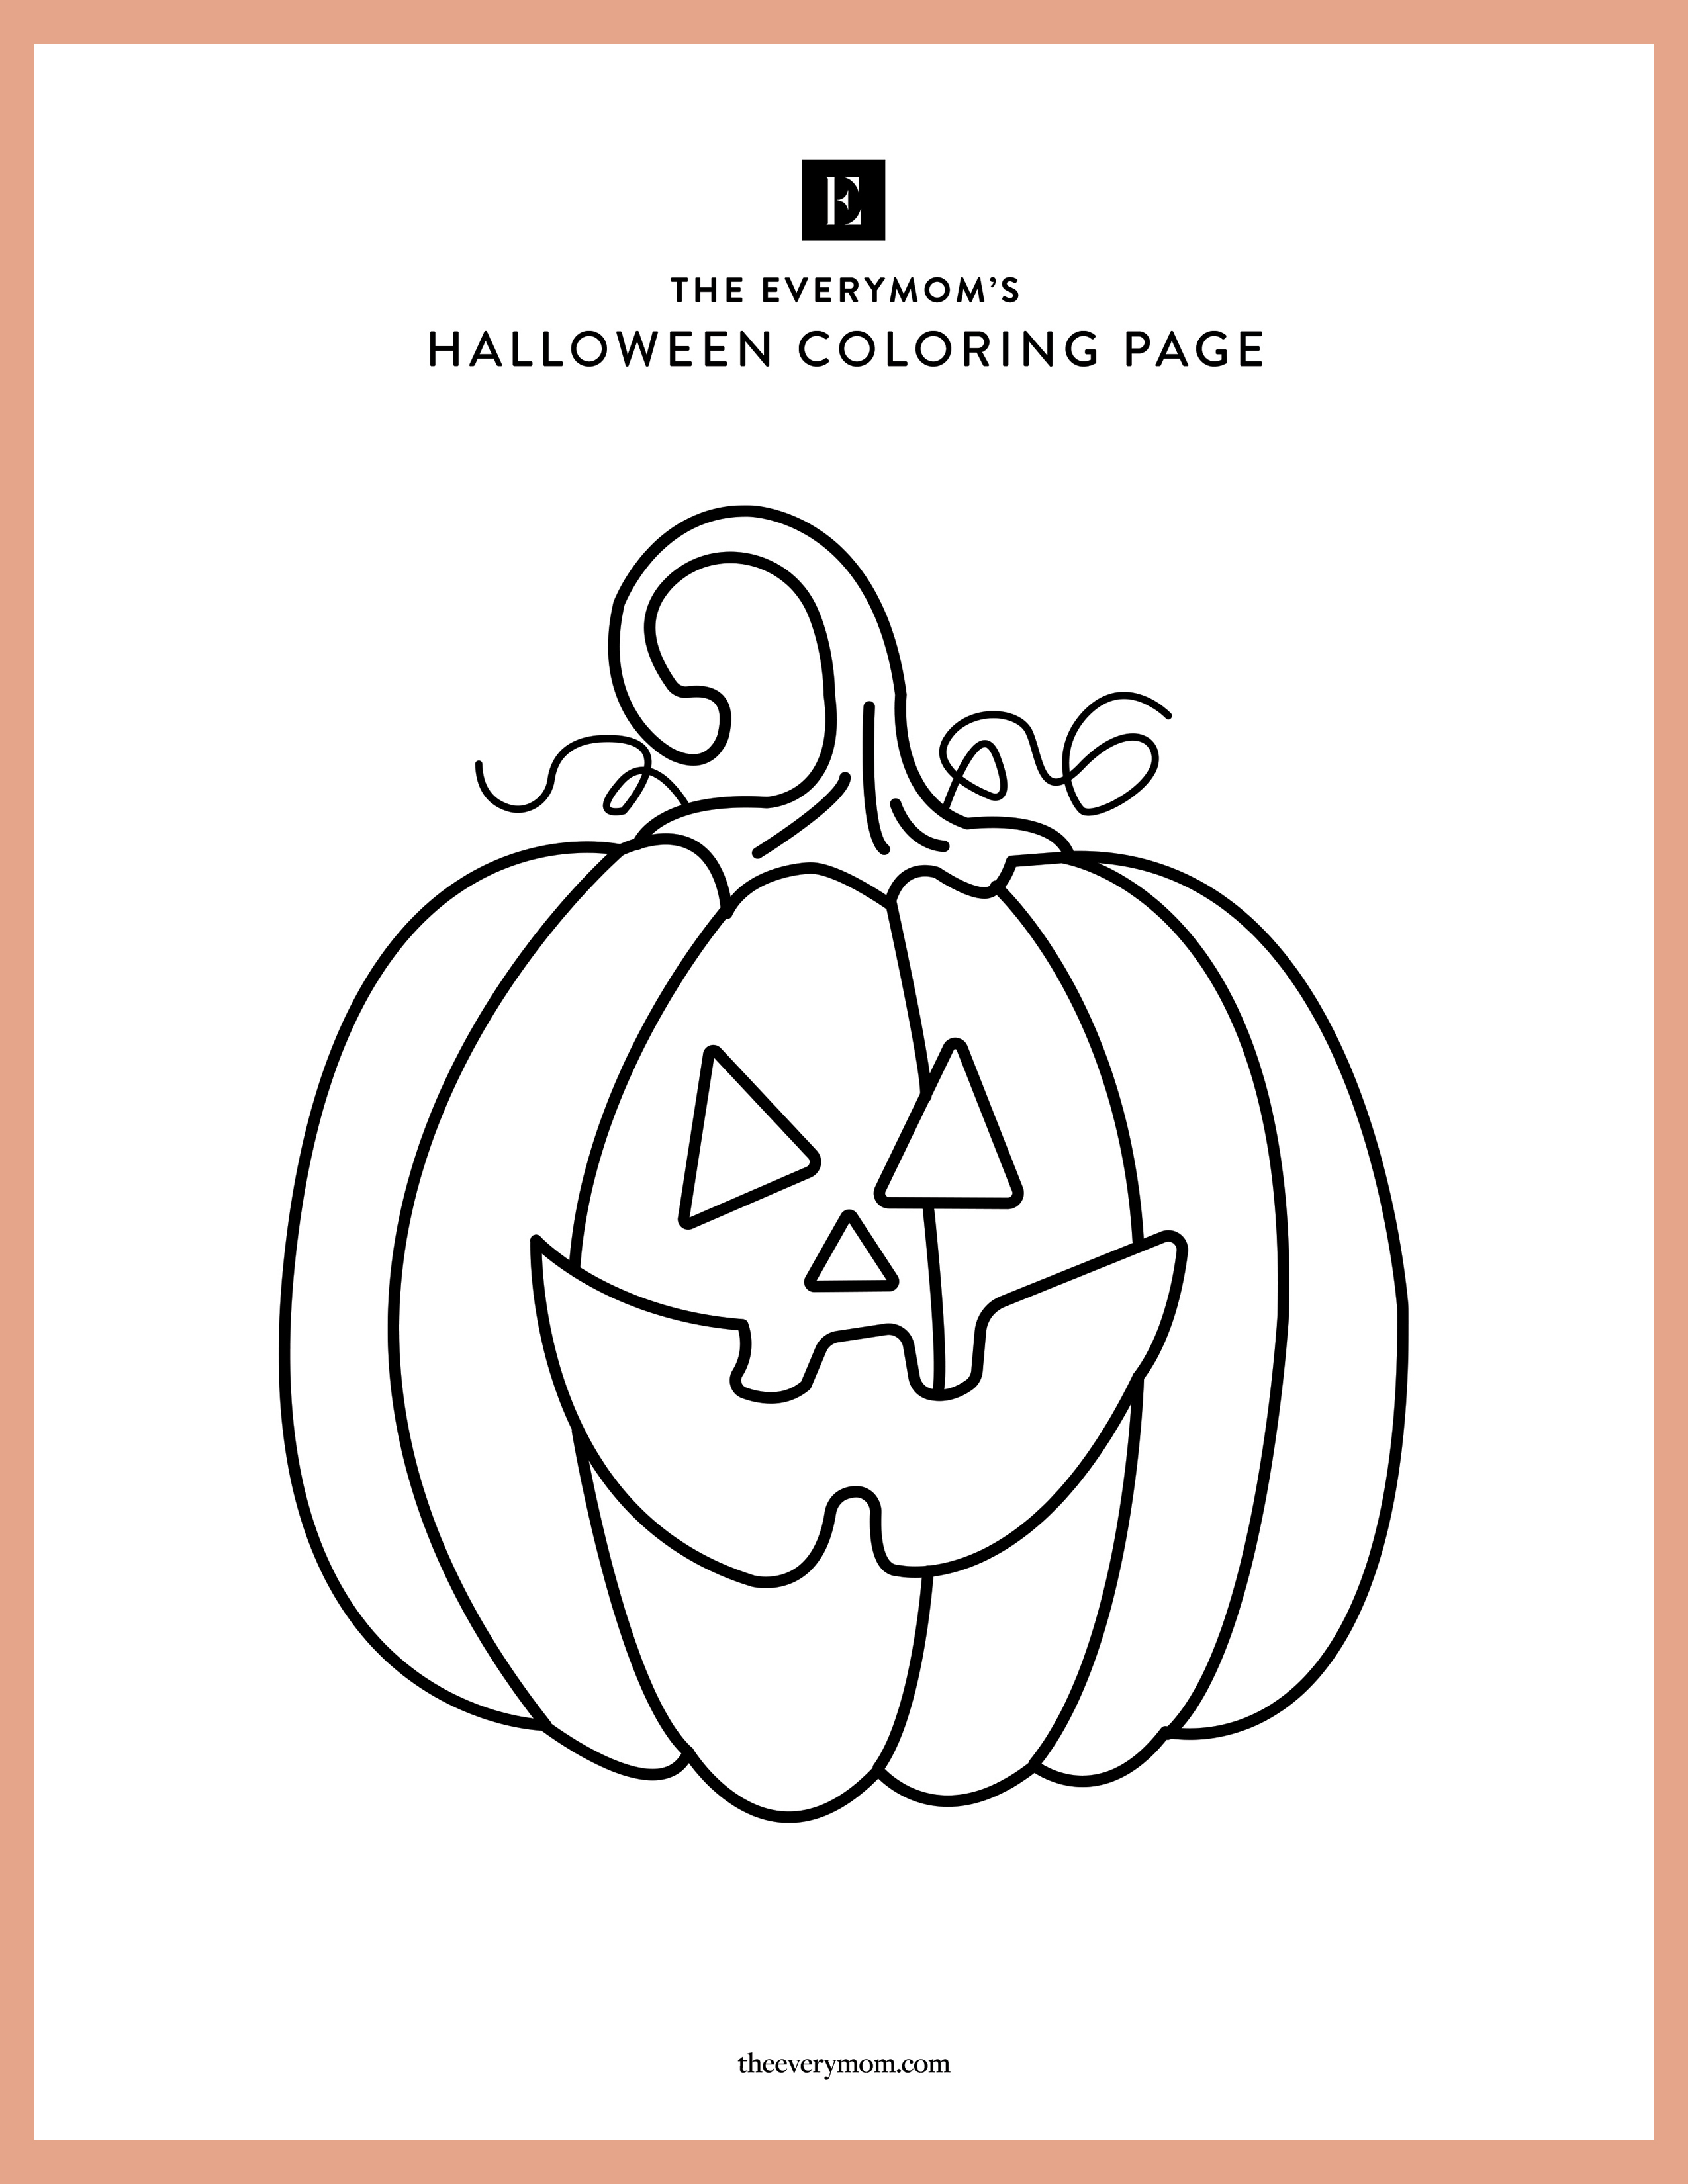 Spooky fun free printable halloween coloring pages for kids